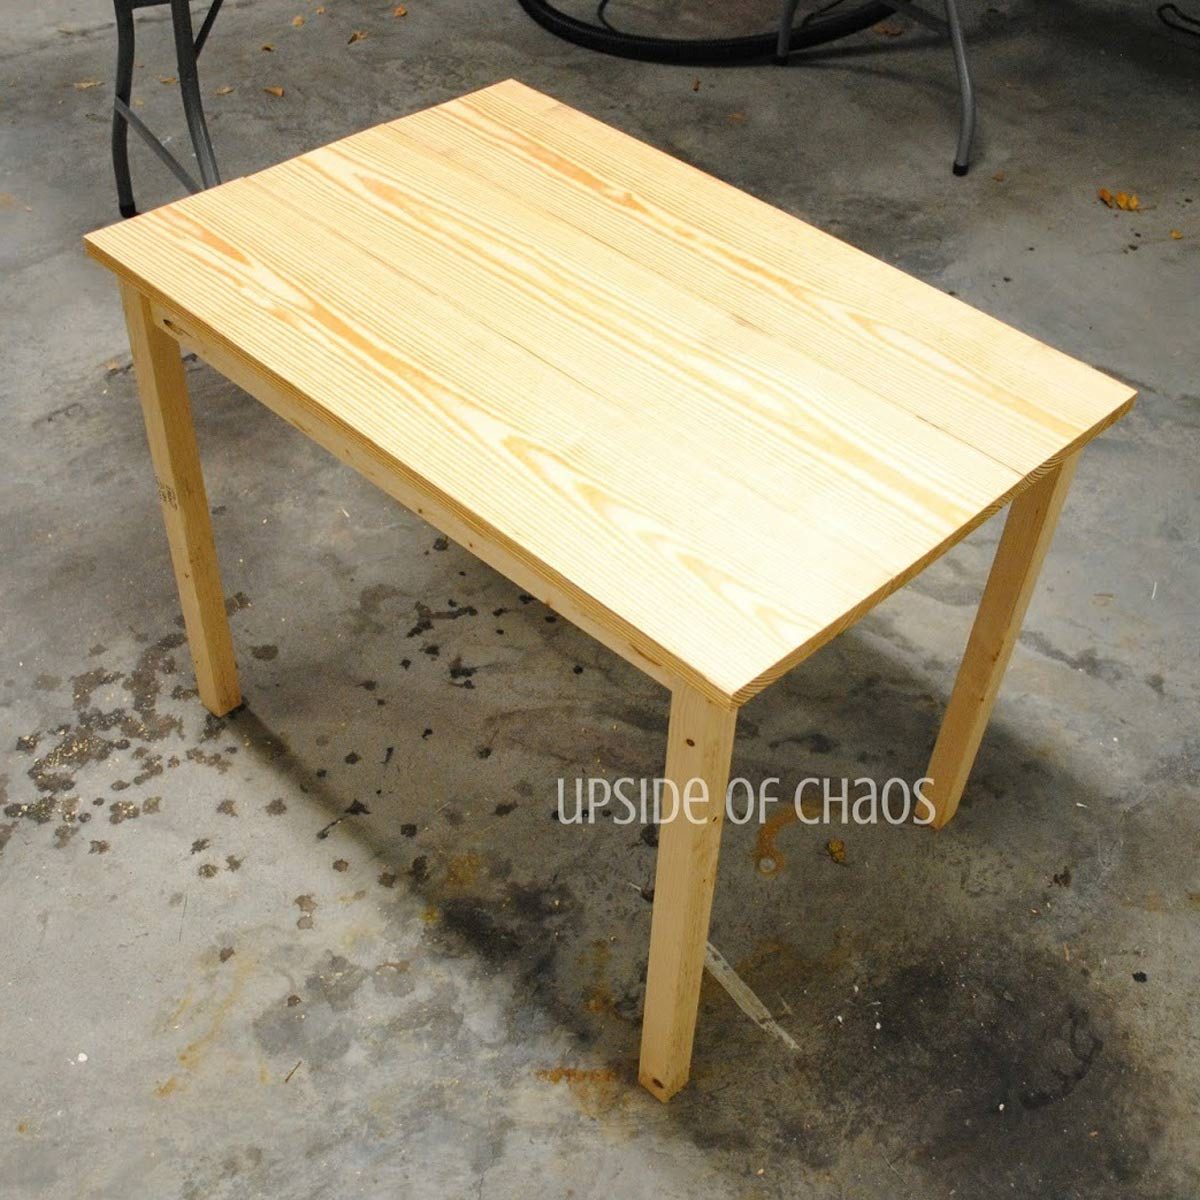  Simple Table